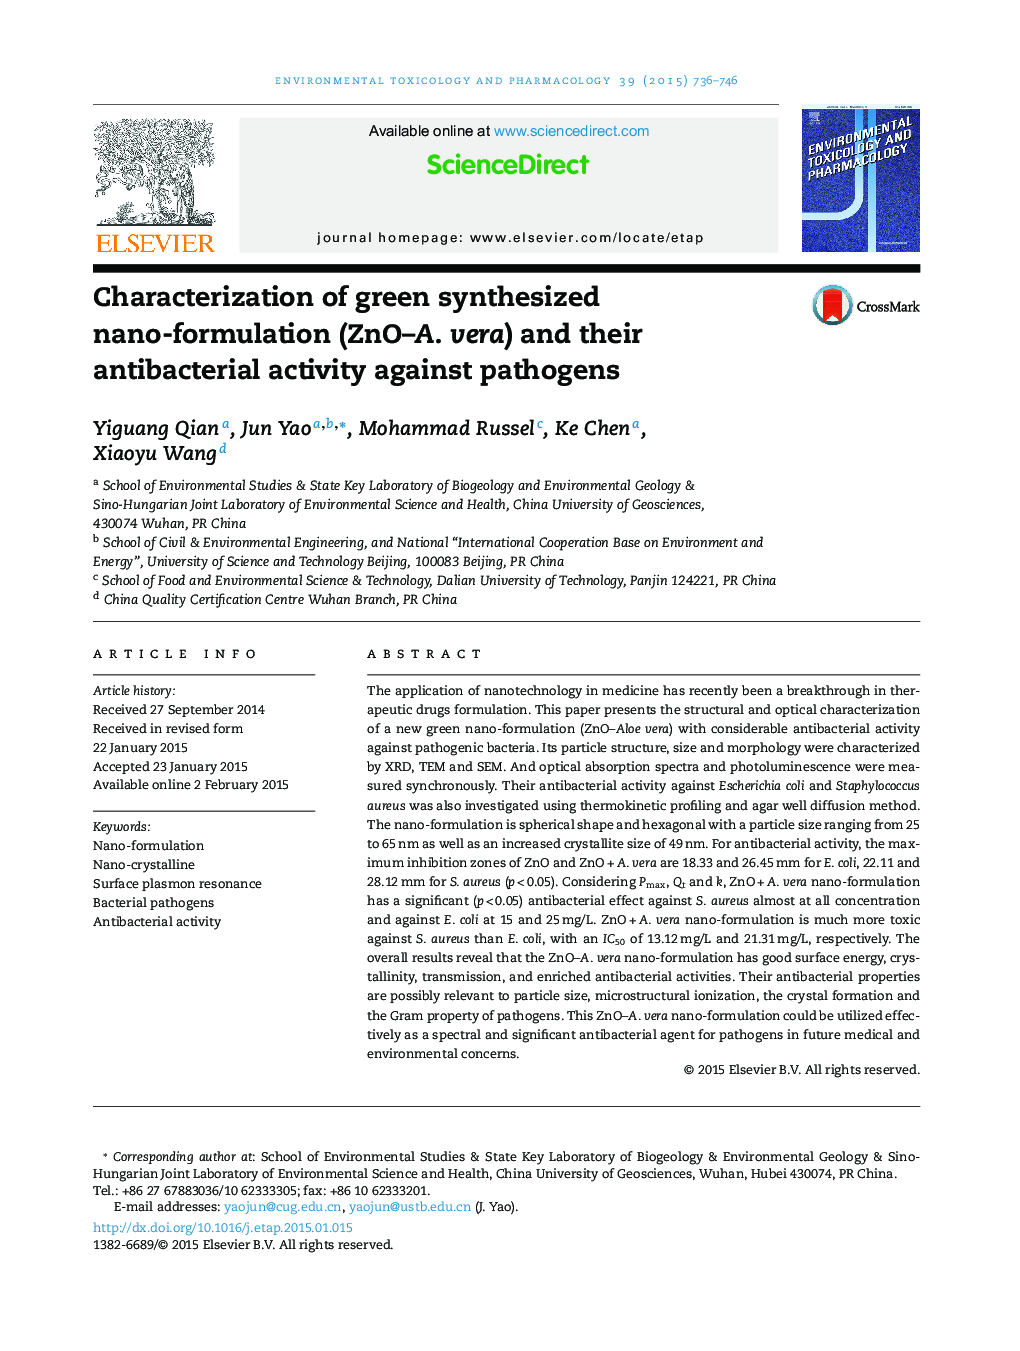 Characterization of green synthesized nano-formulation (ZnO-A. vera) and their antibacterial activity against pathogens